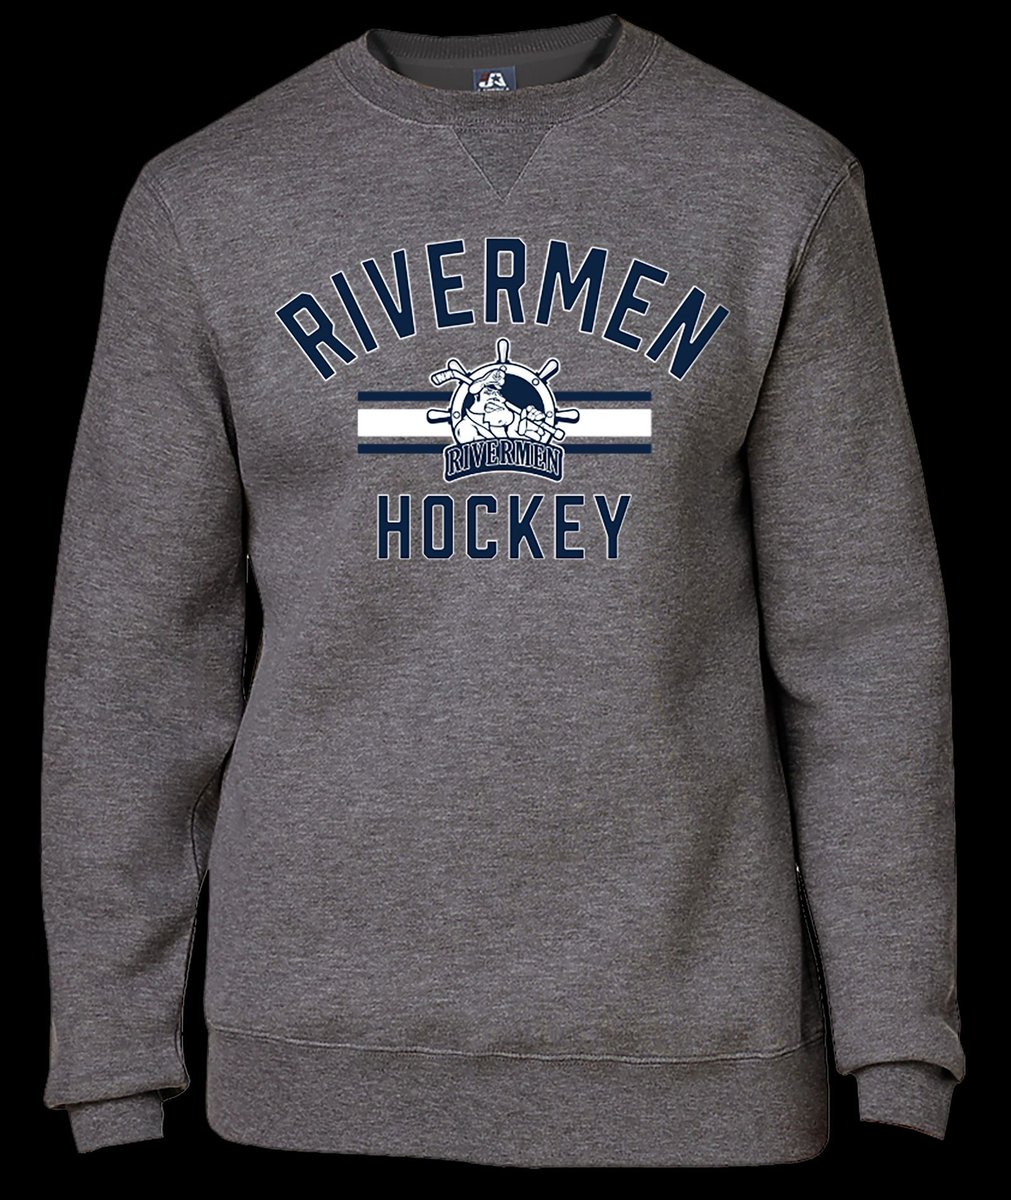 We are cleaning out our Adult Sweatshirt Inventory from the Championship Season...We have less than two dozen different adult sweatshirts of various styles and sizes left.......All are now priced at just $29.00 each! Get yours, before they are all gone 👇 buff.ly/4bvwv12